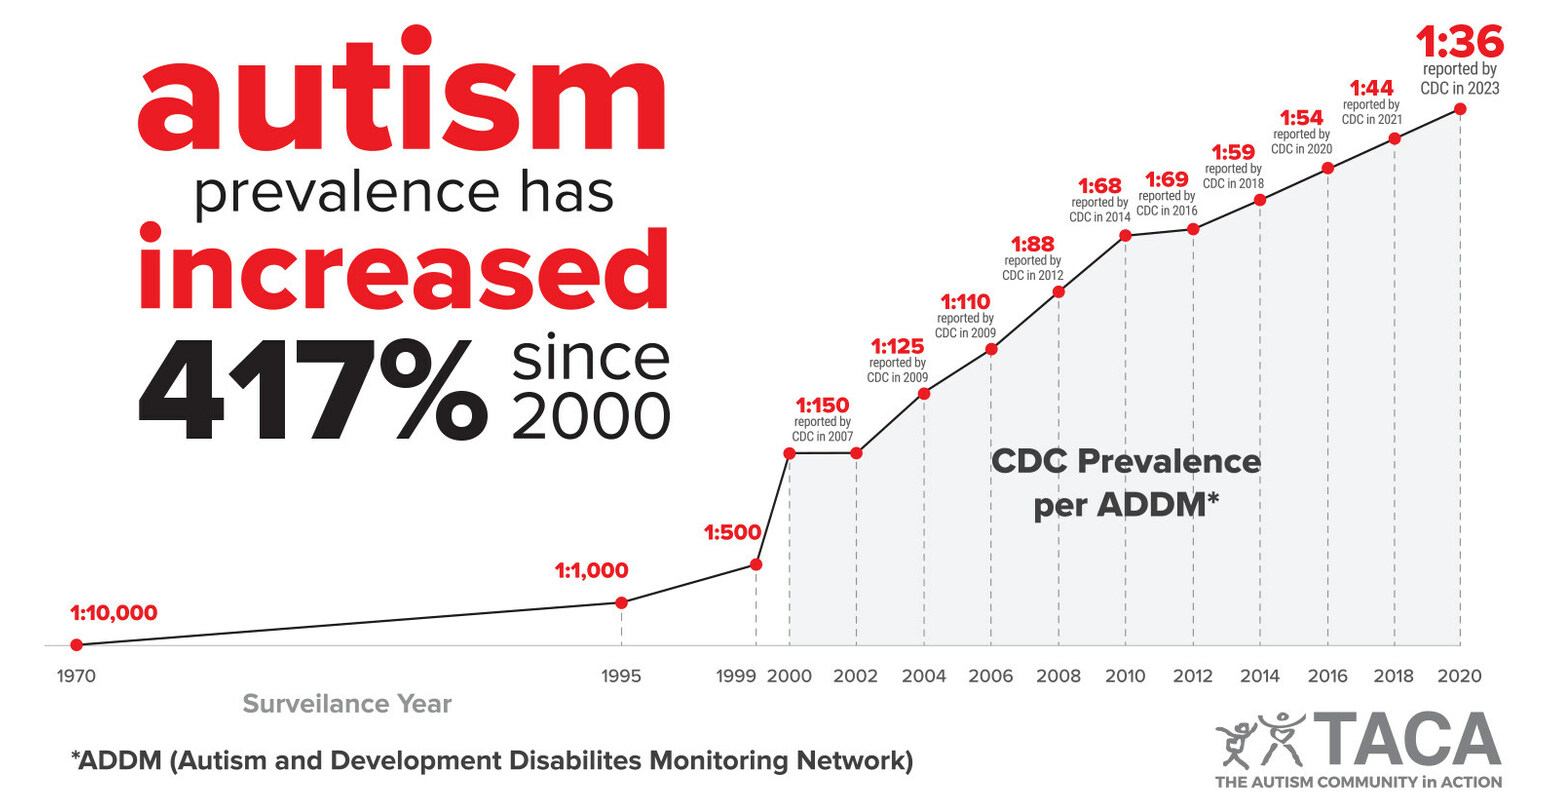 Autism Prevalence is Now 1 in 36, Signifying the 18 Increase in